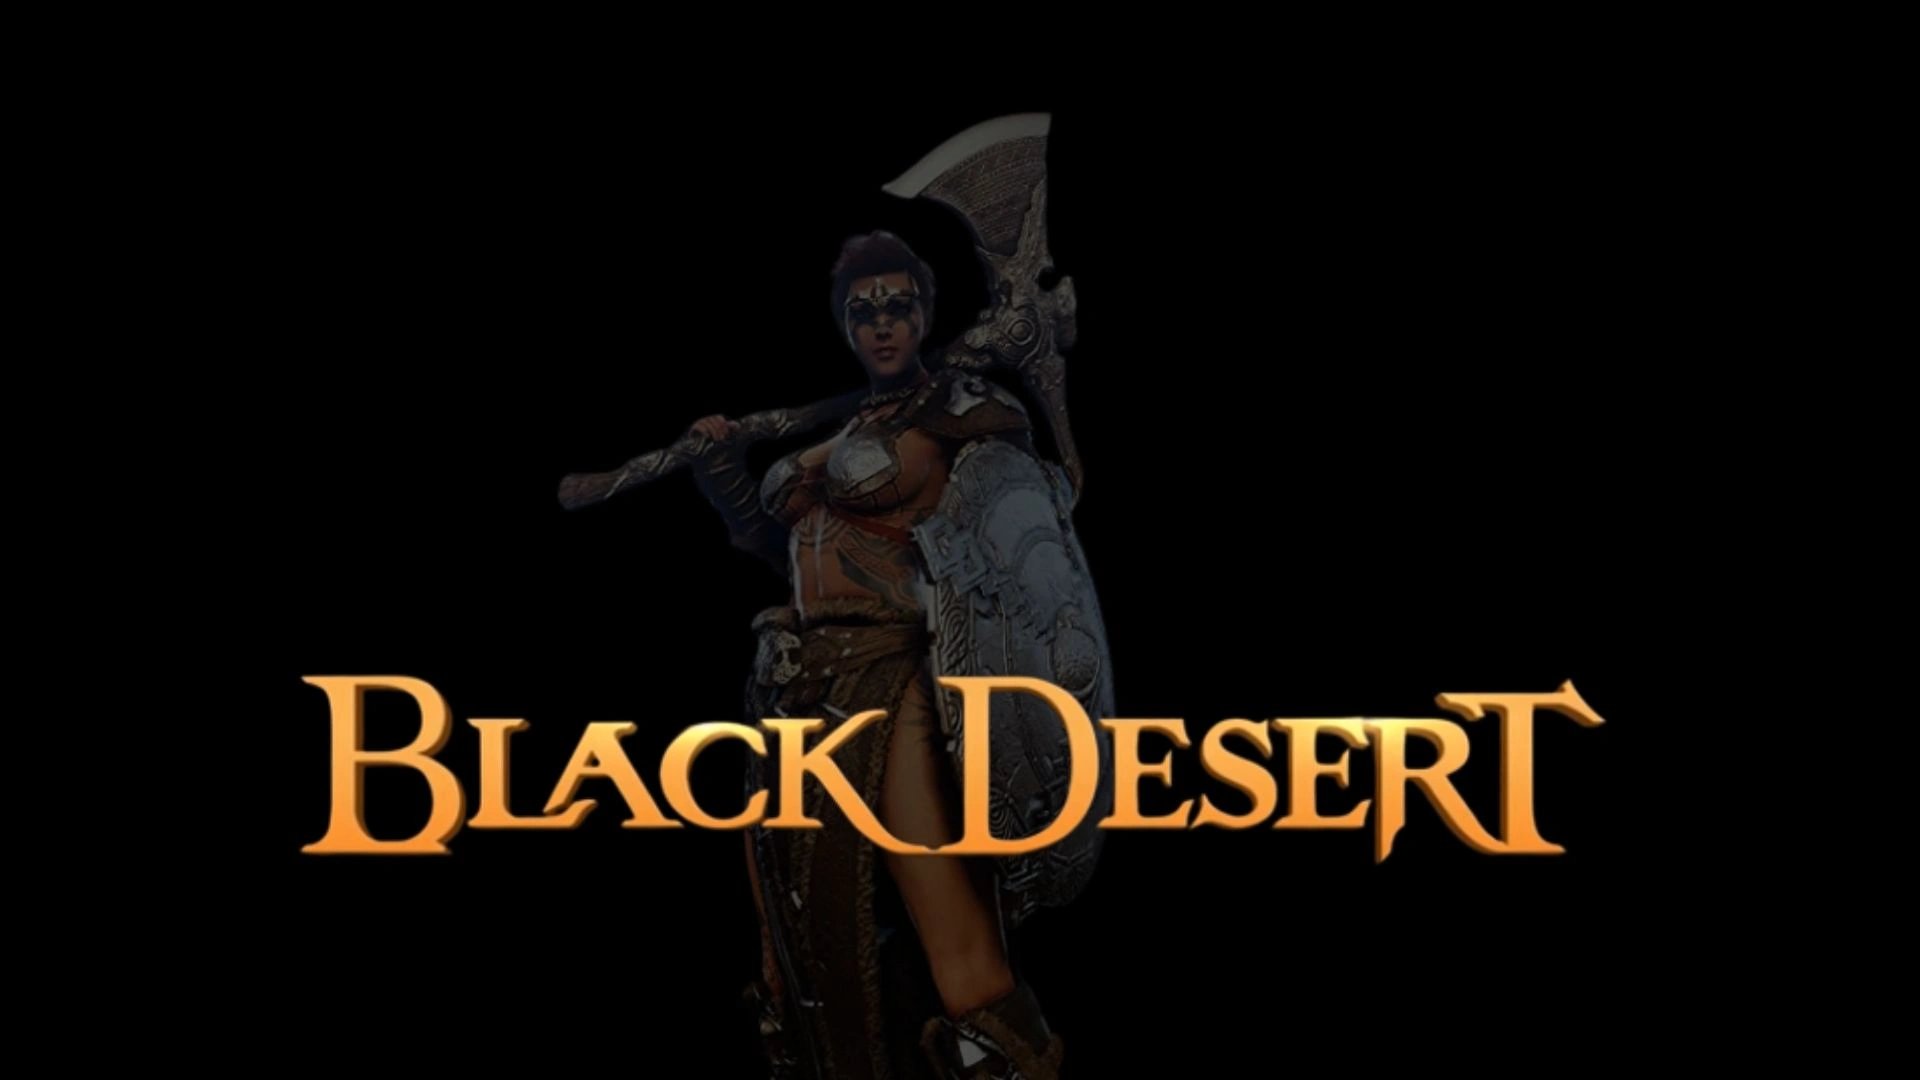 Black Desert Parents Guide and Age Rating (2014)